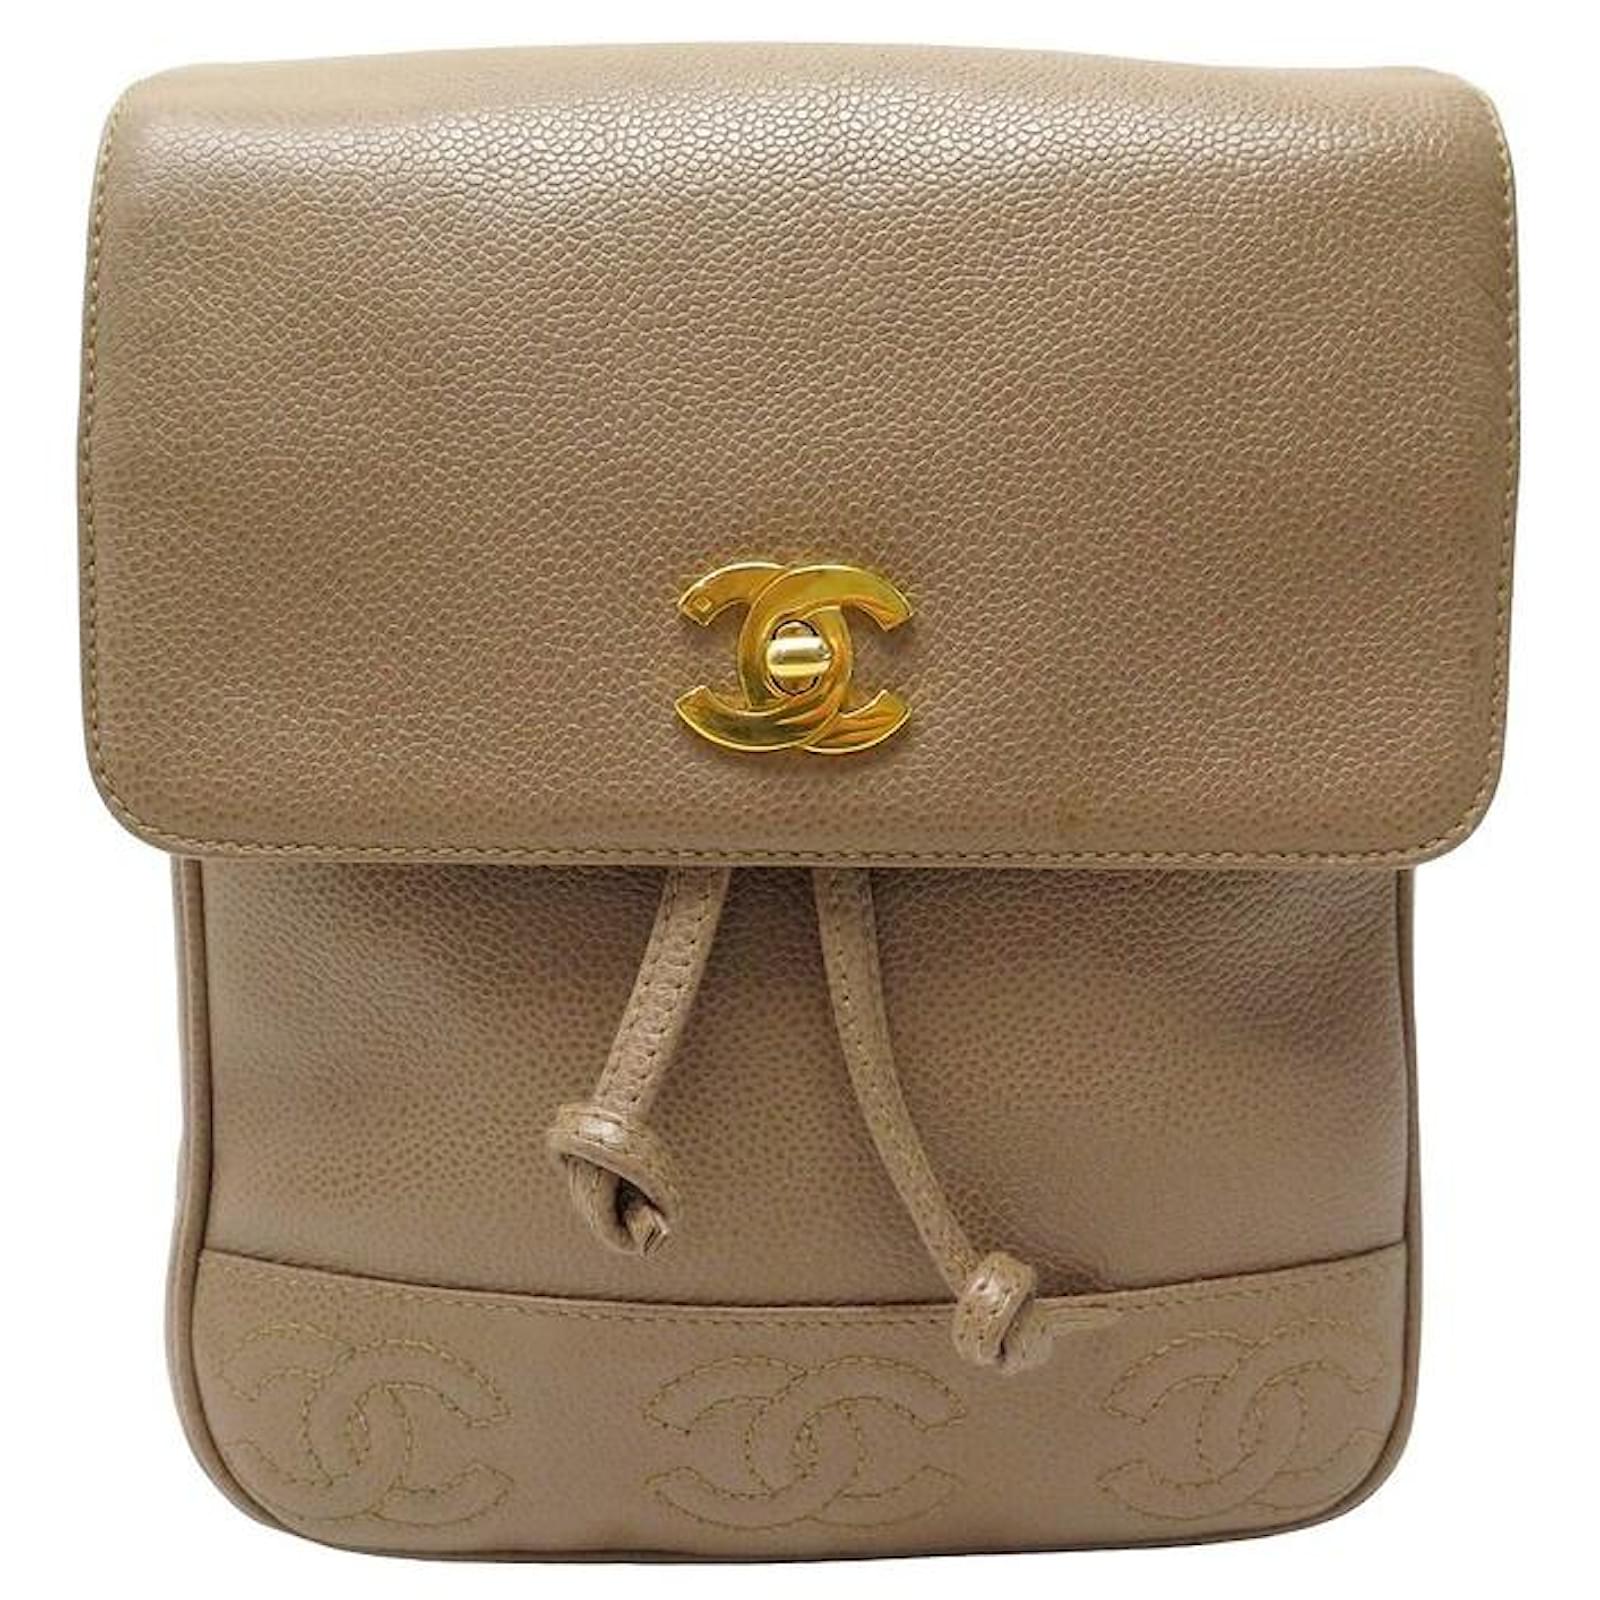 VINTAGE CHANEL BACKPACK WITH CC LOGO CLASP IN TAUPE CAVIAR LEATHER